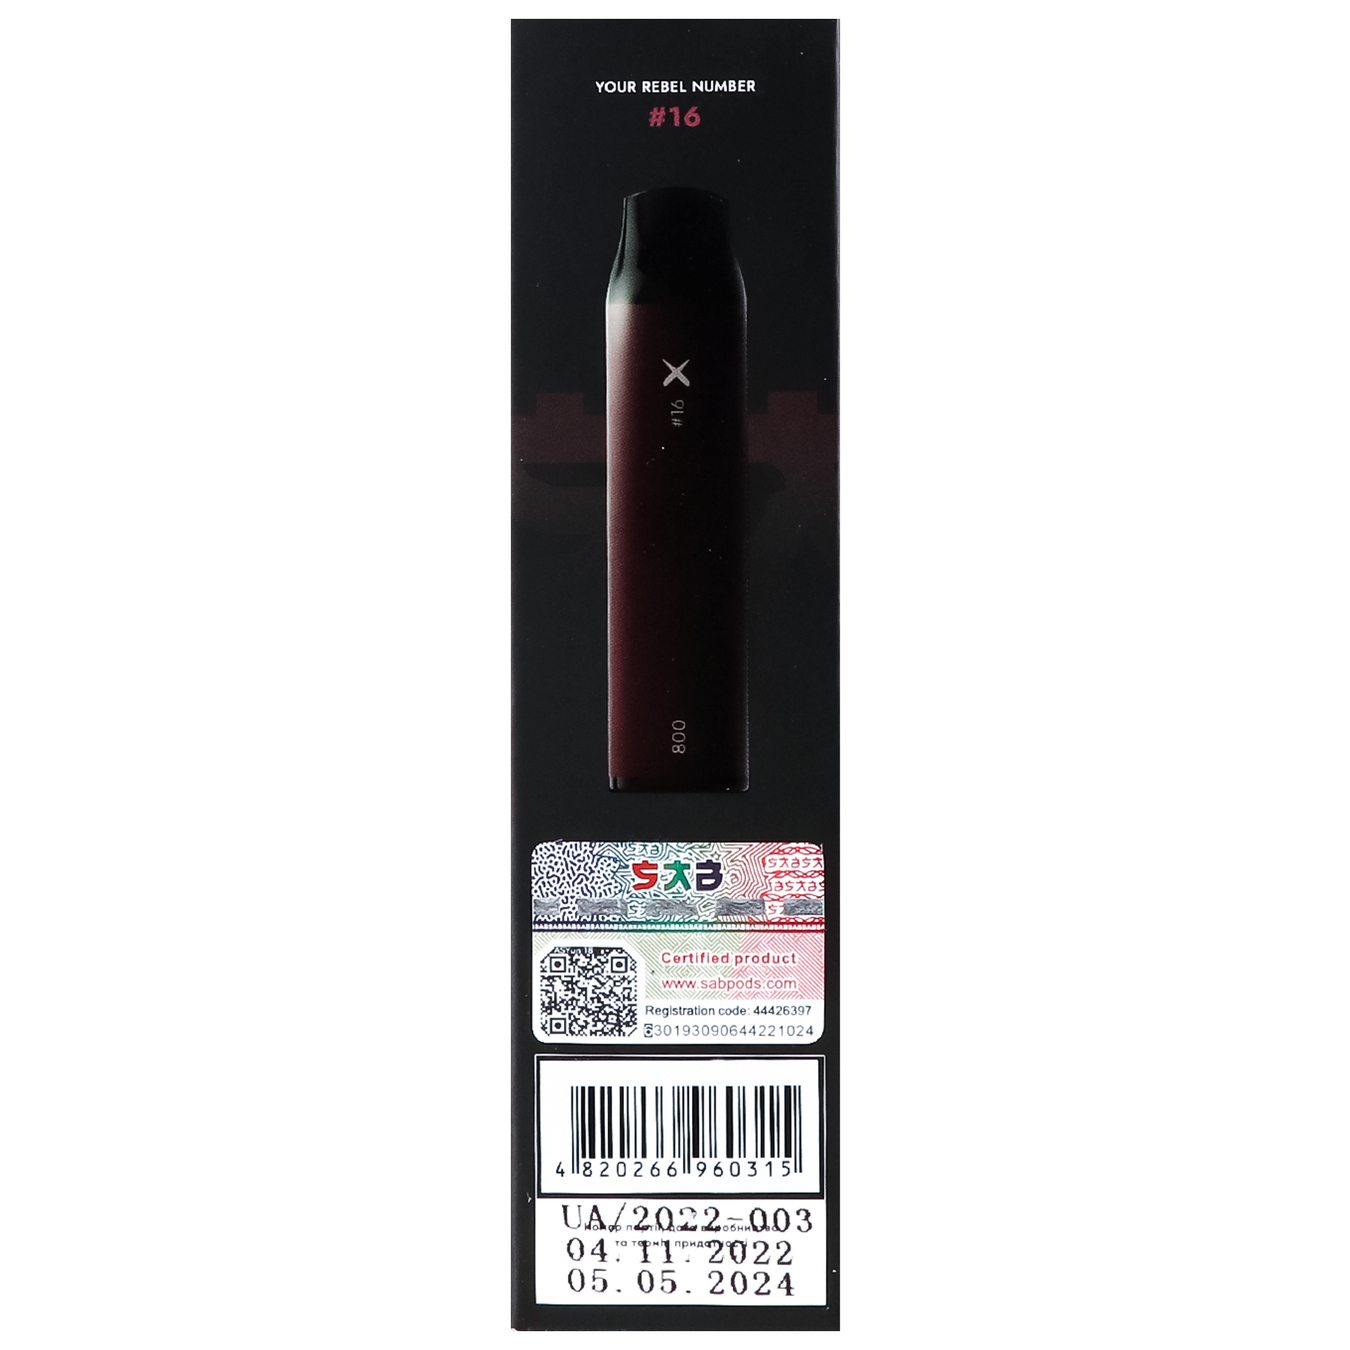 Vaporizer SAB 800 No. 16 strawberry sensation 2% 2ml (the price is without excise tax) 5